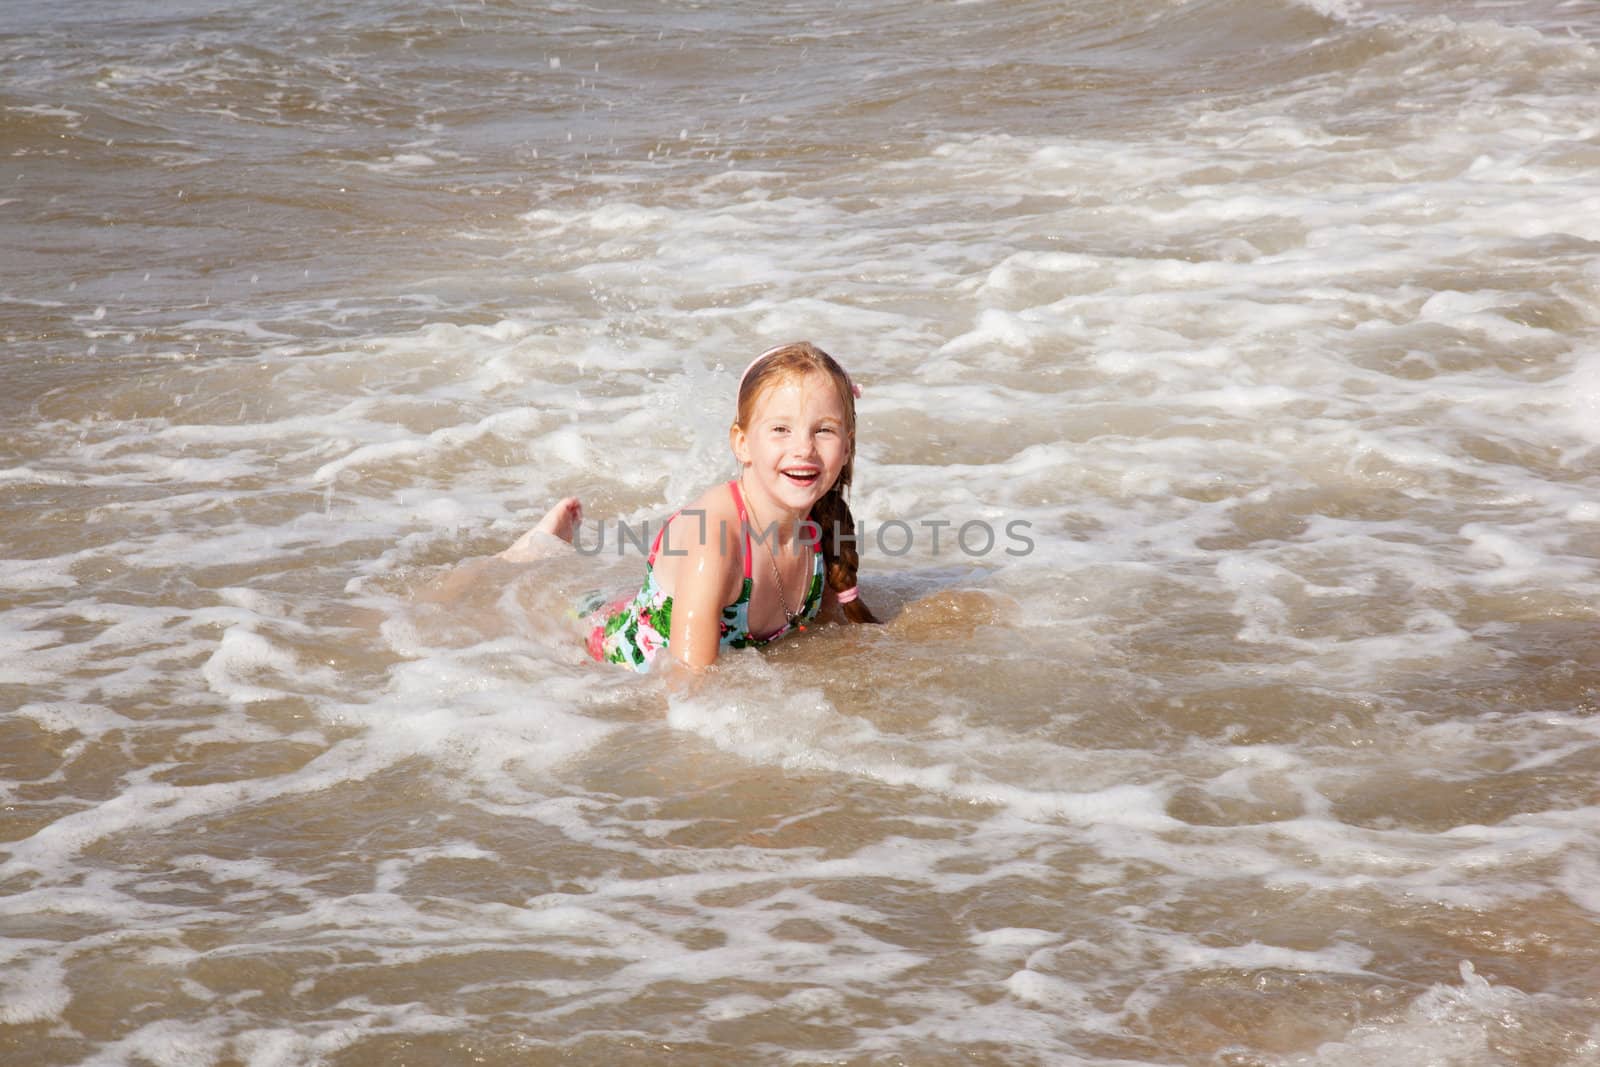 young girl enjoying the water in the surf near the beach